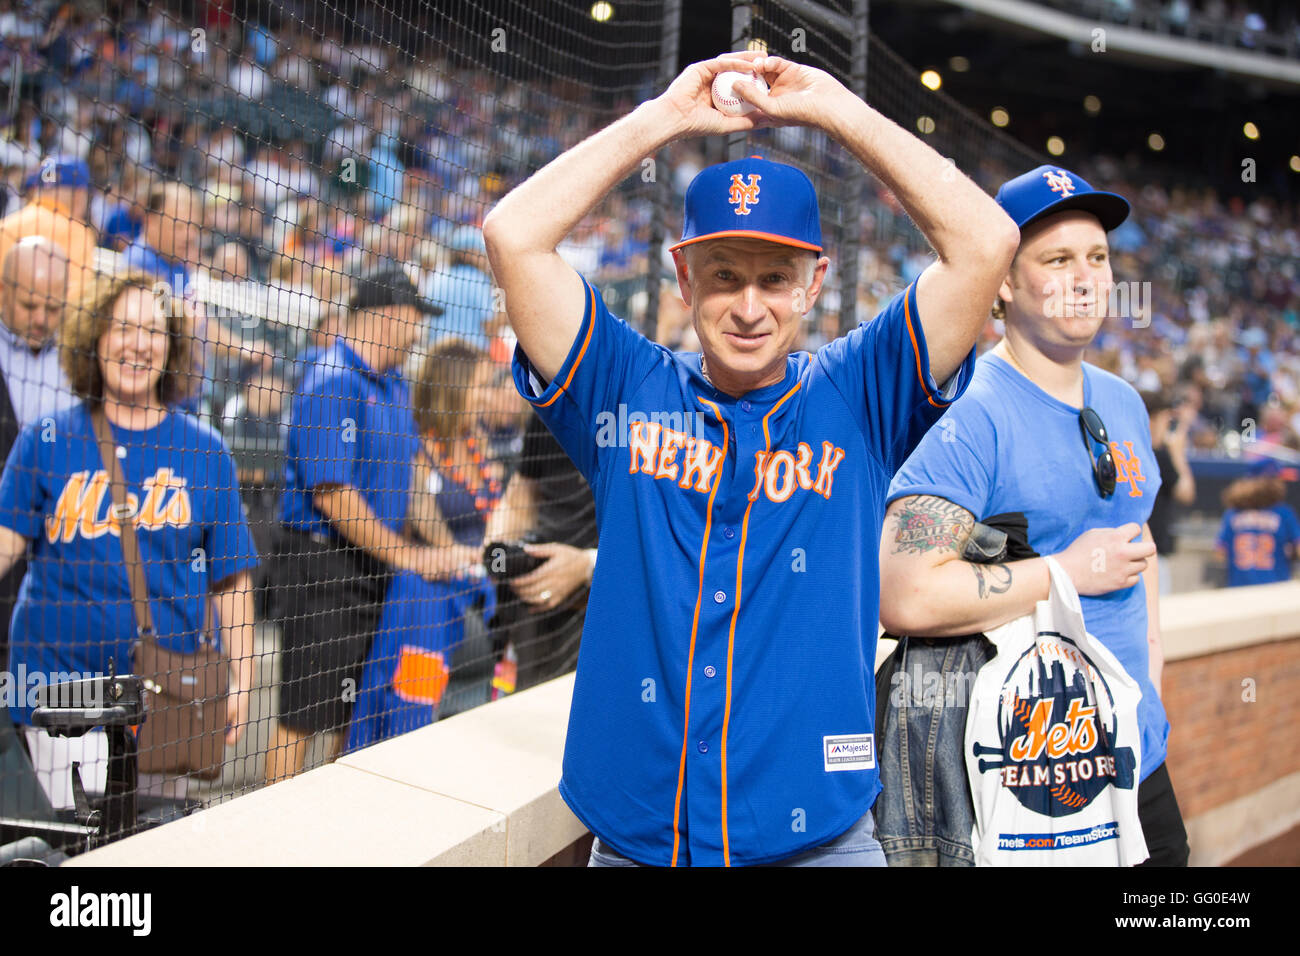 Nyc, United States. 01st Aug, 2016. John McEnroe throws the first pitch at the New York Mets vs New York Yankees baseball game at Citifield. Credit:  Louise Wateridge/Pacific Press/Alamy Live News Stock Photo